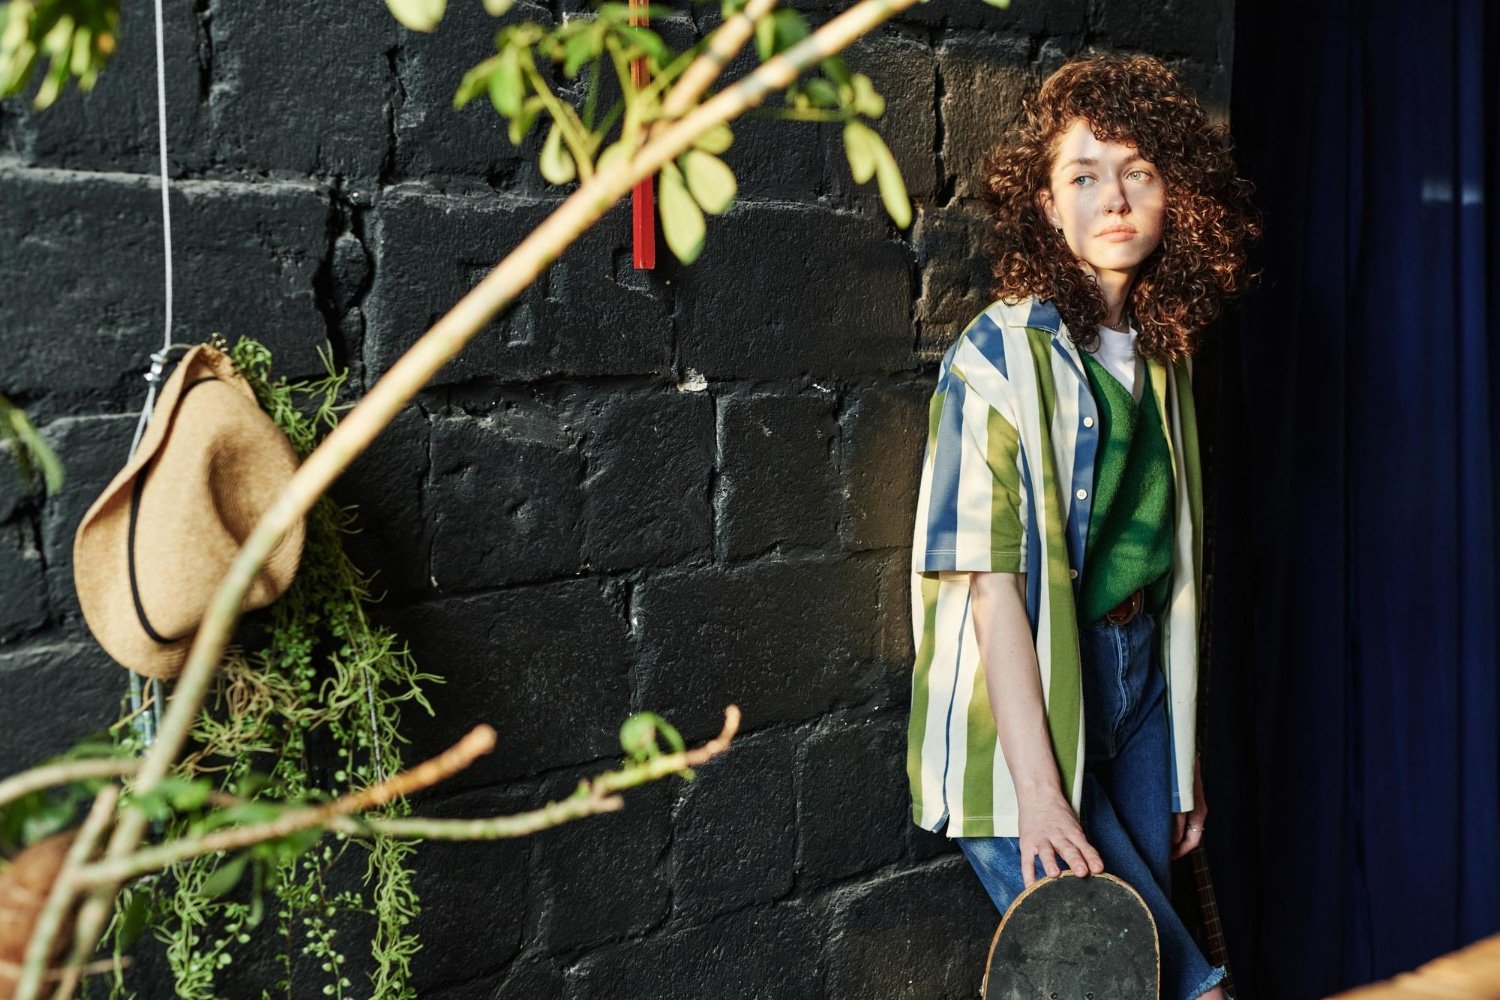 Outerknown: Sustainable Fashion that Makes a Statement